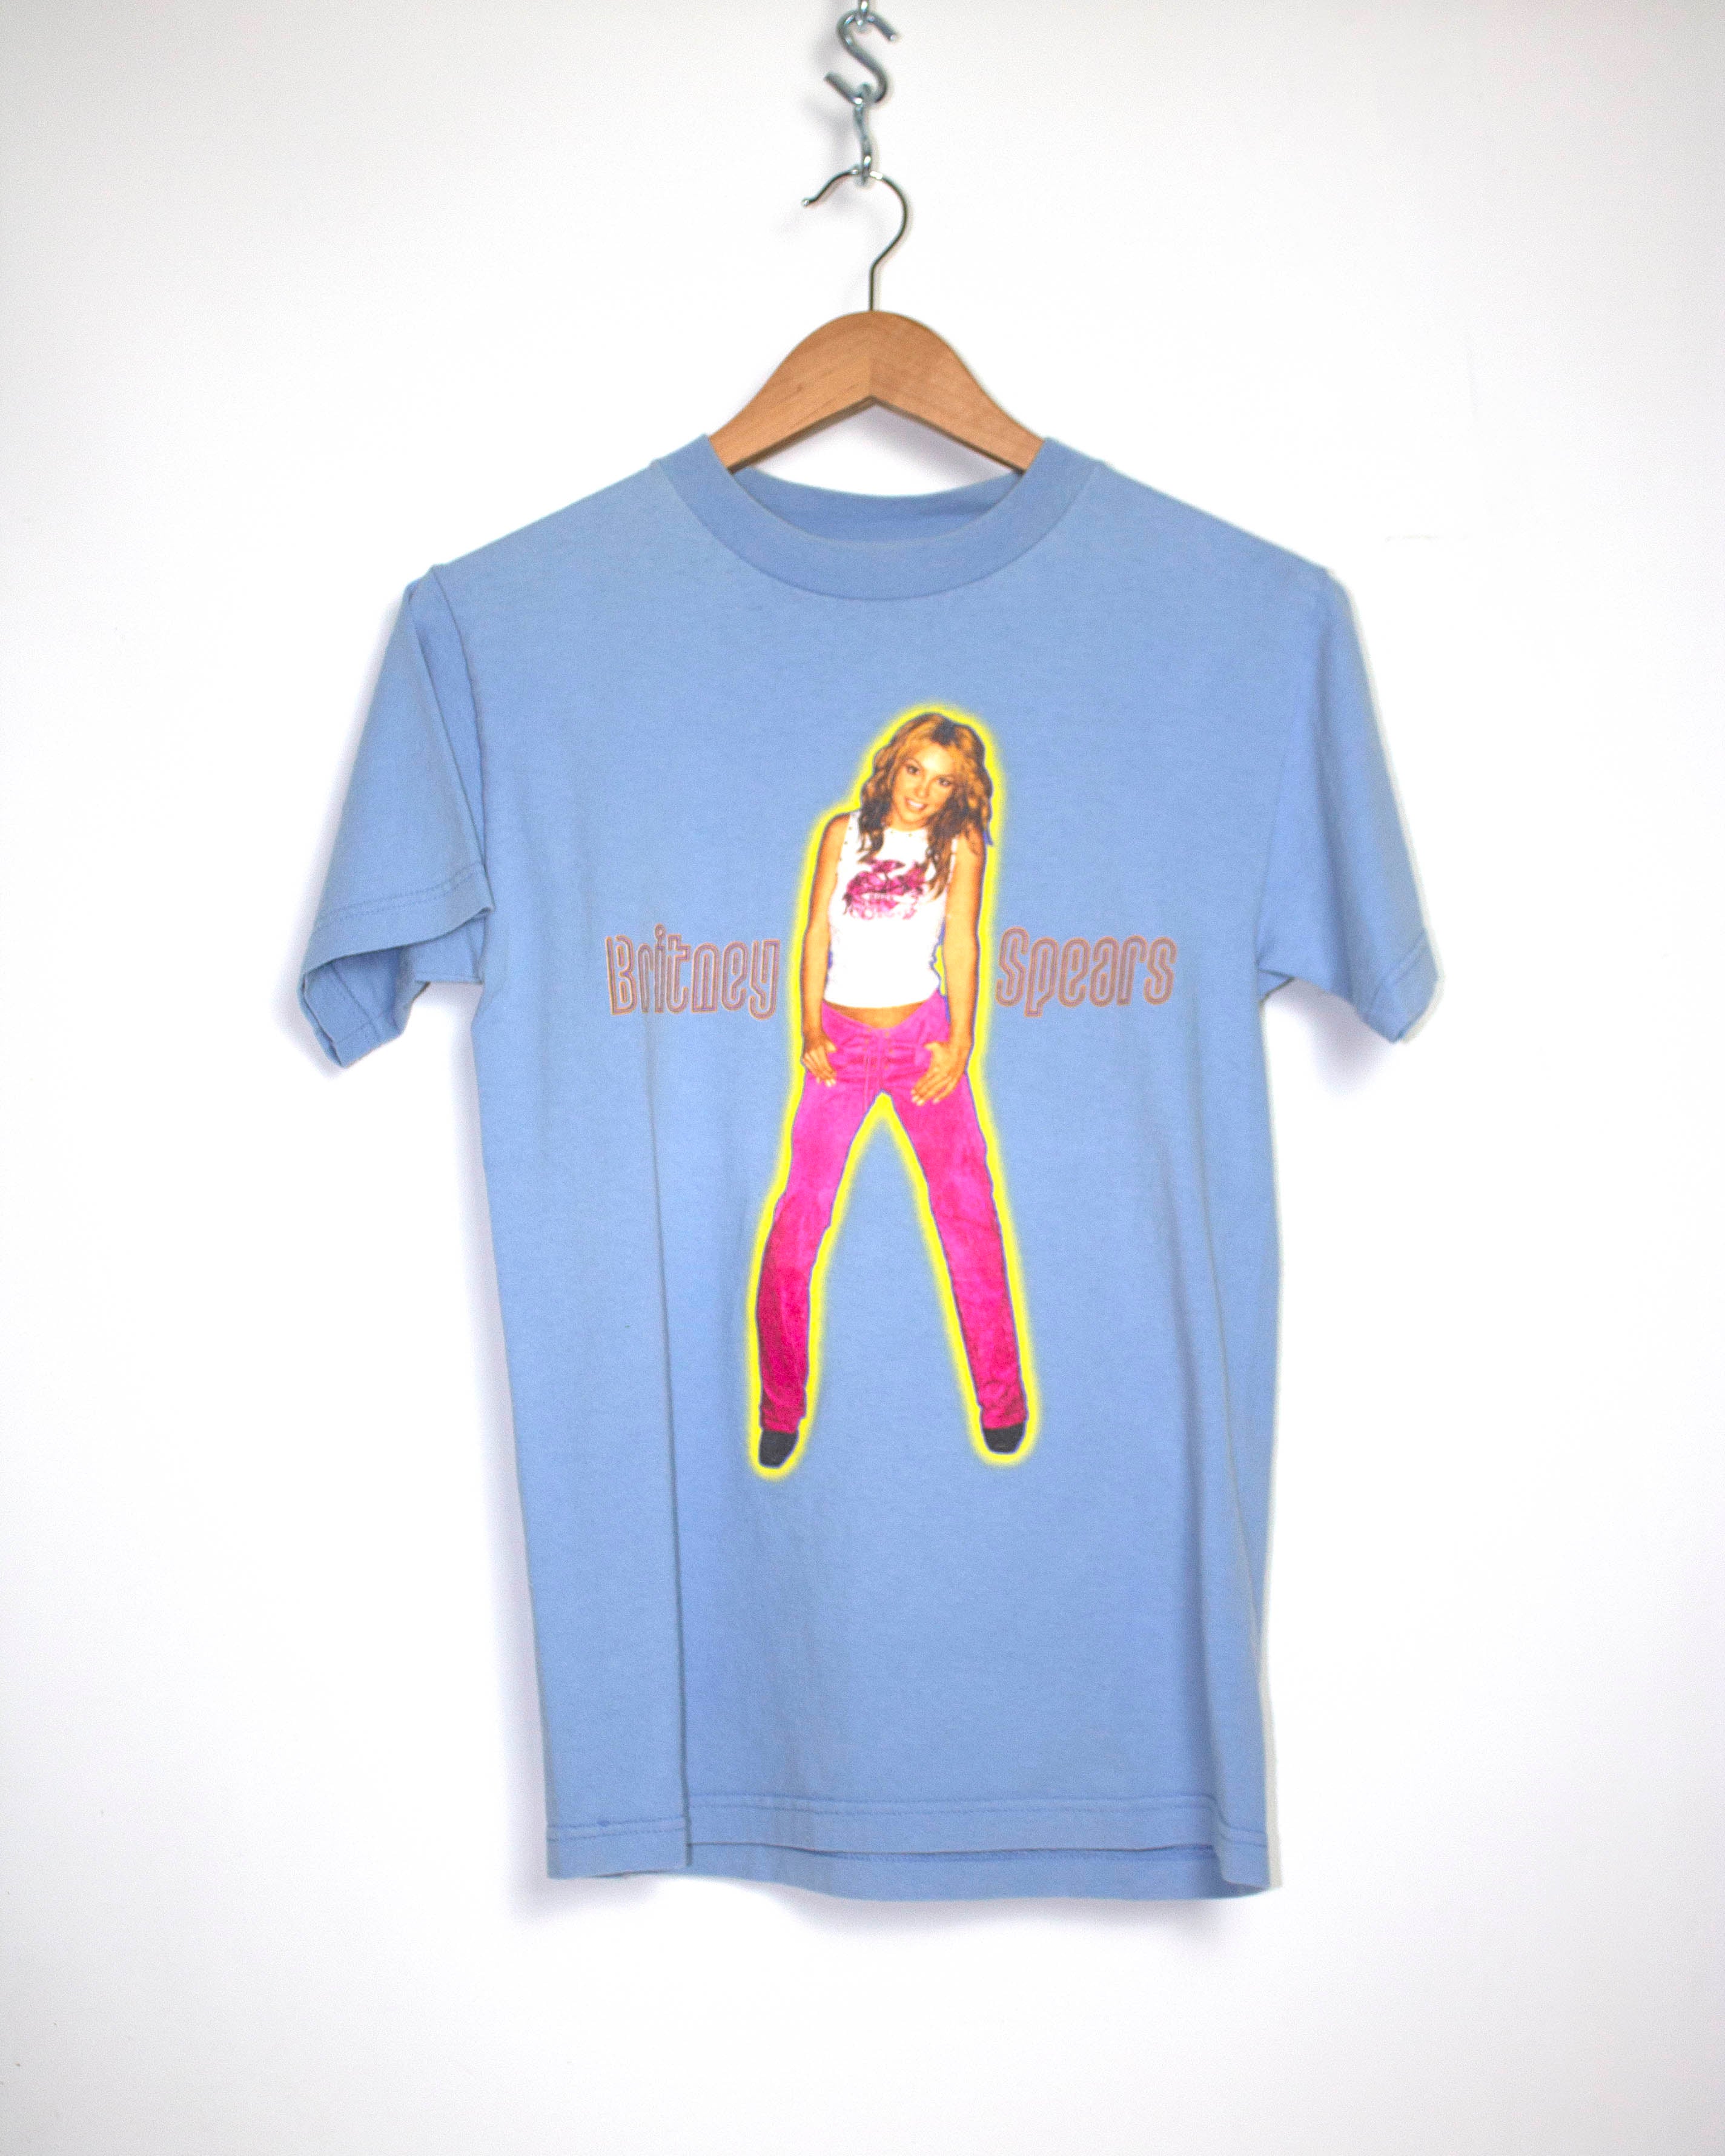 Vintage Britney Spears Oops I Did It Again Tour T-Shirt Sz S